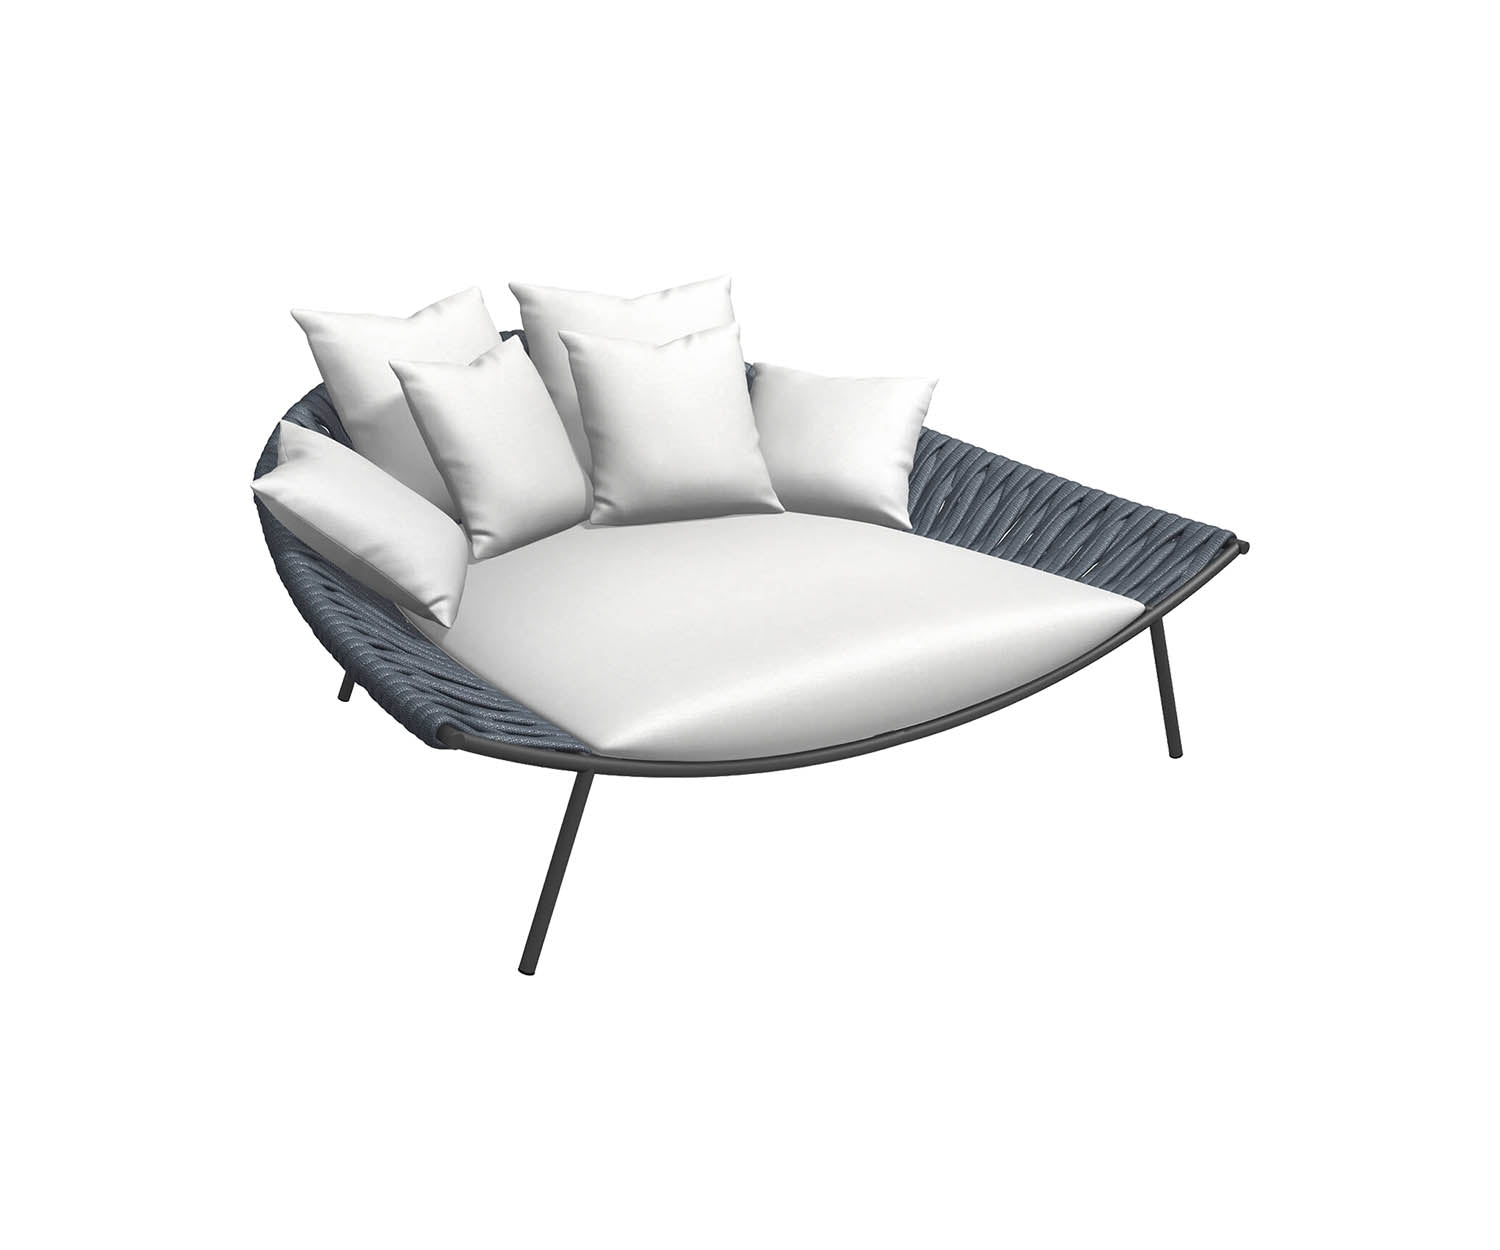 Roda, Arena 001 Daybed